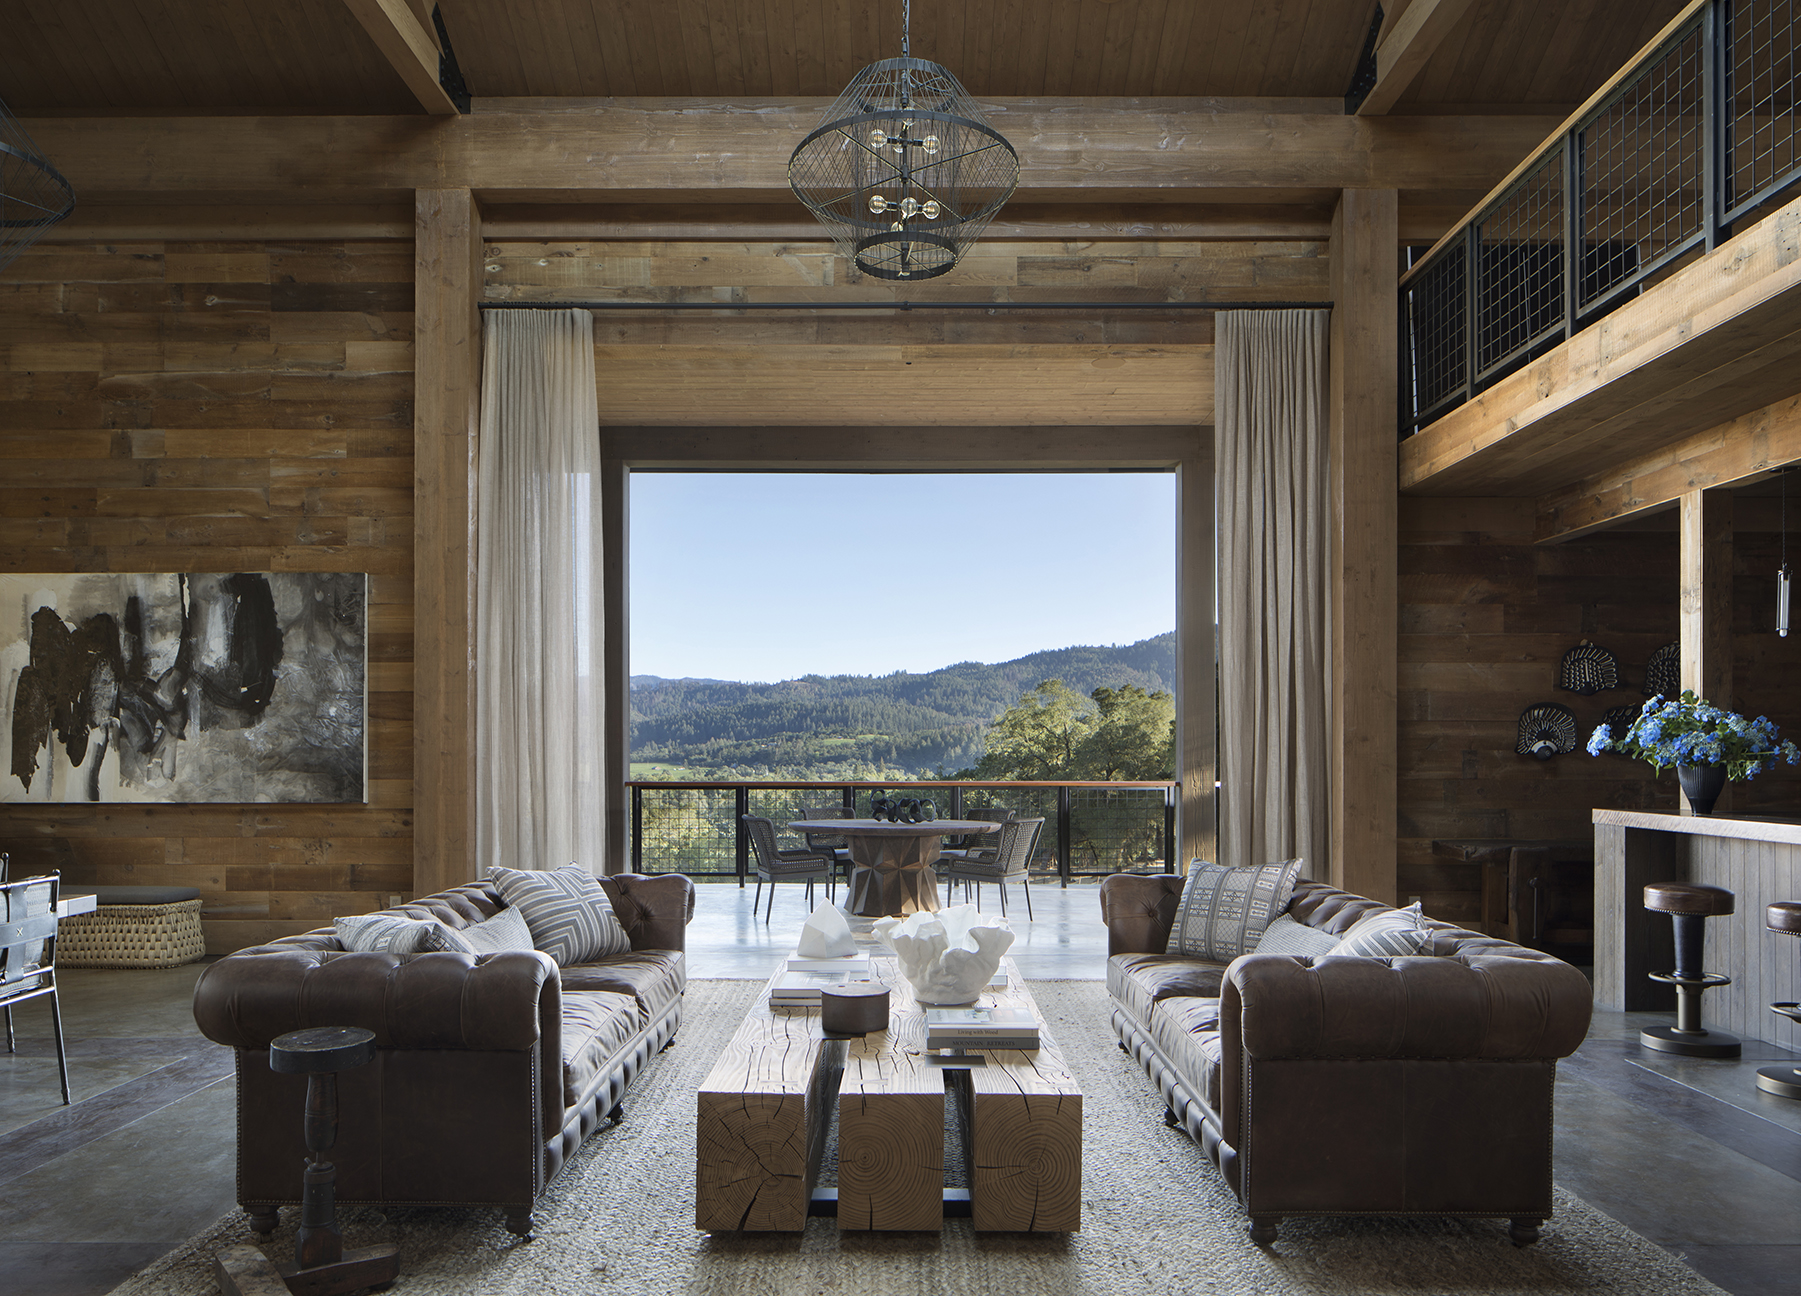 Jennifer-Robin-Interiors-Projects-Party-Barn-3-Lounge-View